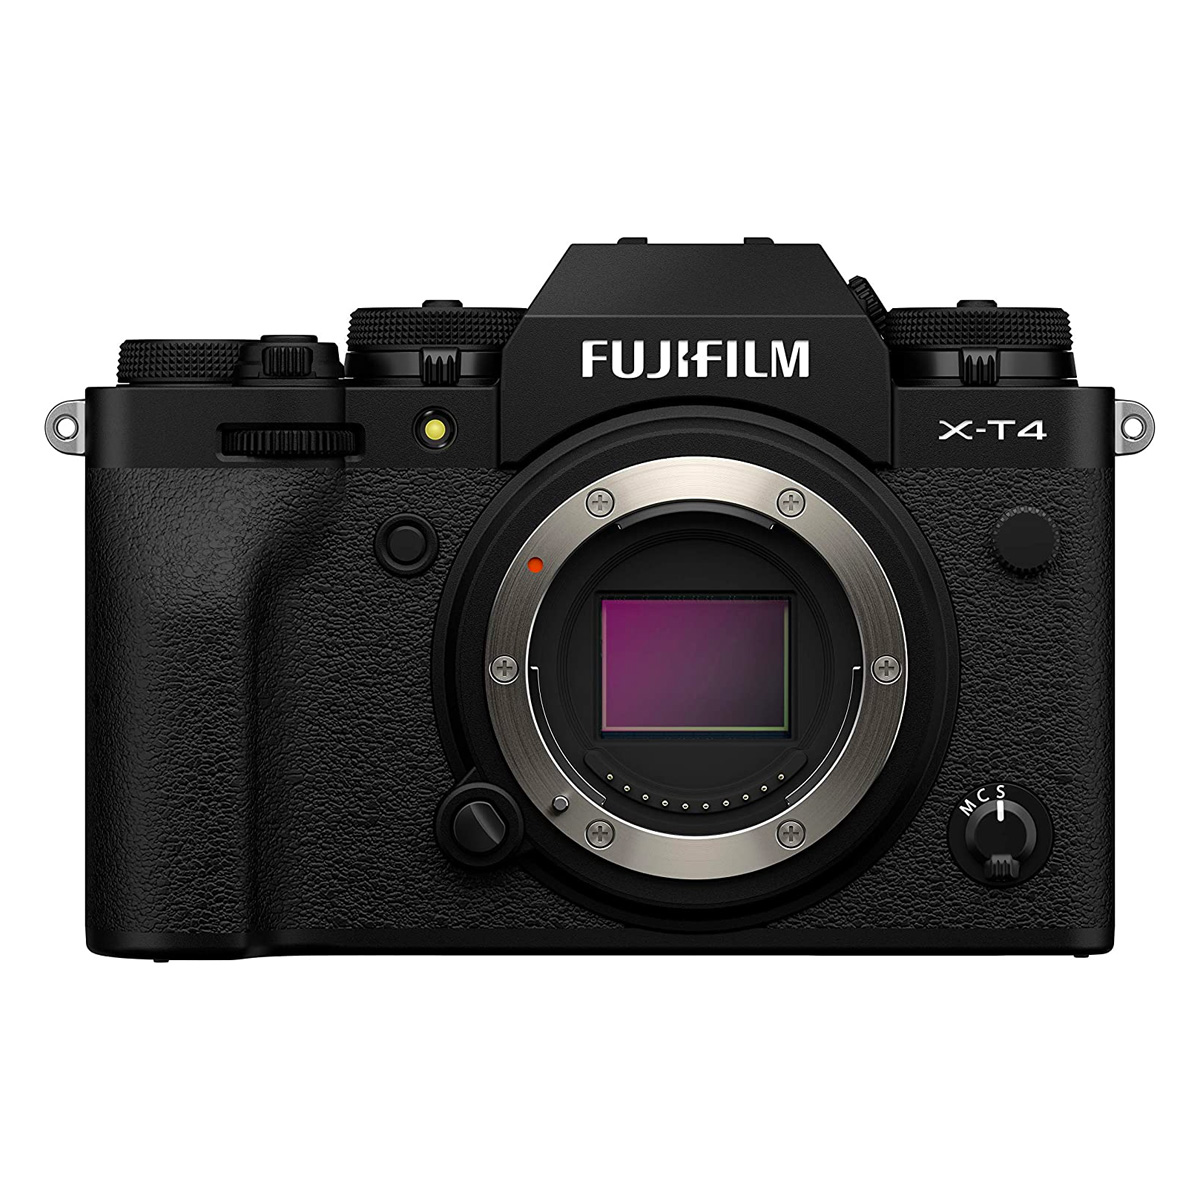 Stock image of the Fujifilm X-T4 on a white background